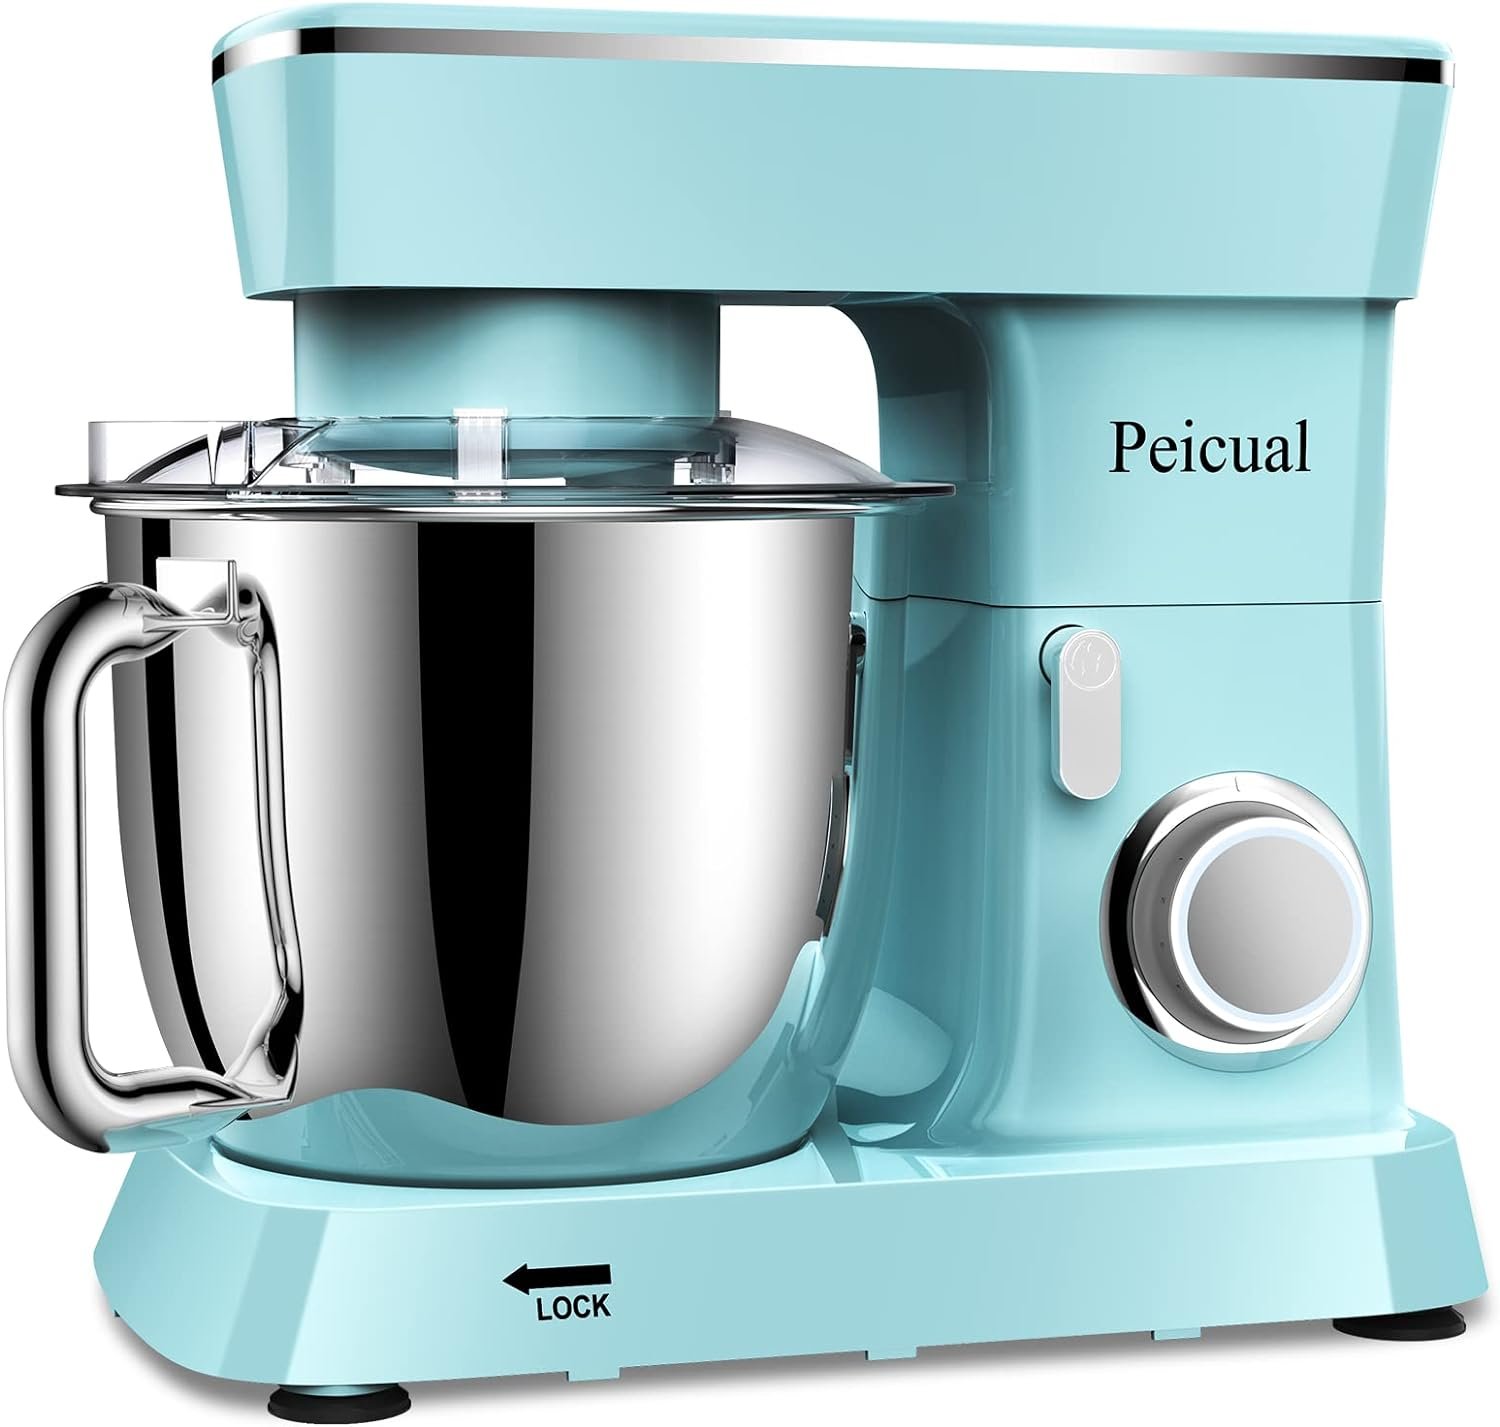 Peicual Stand Mixer Review